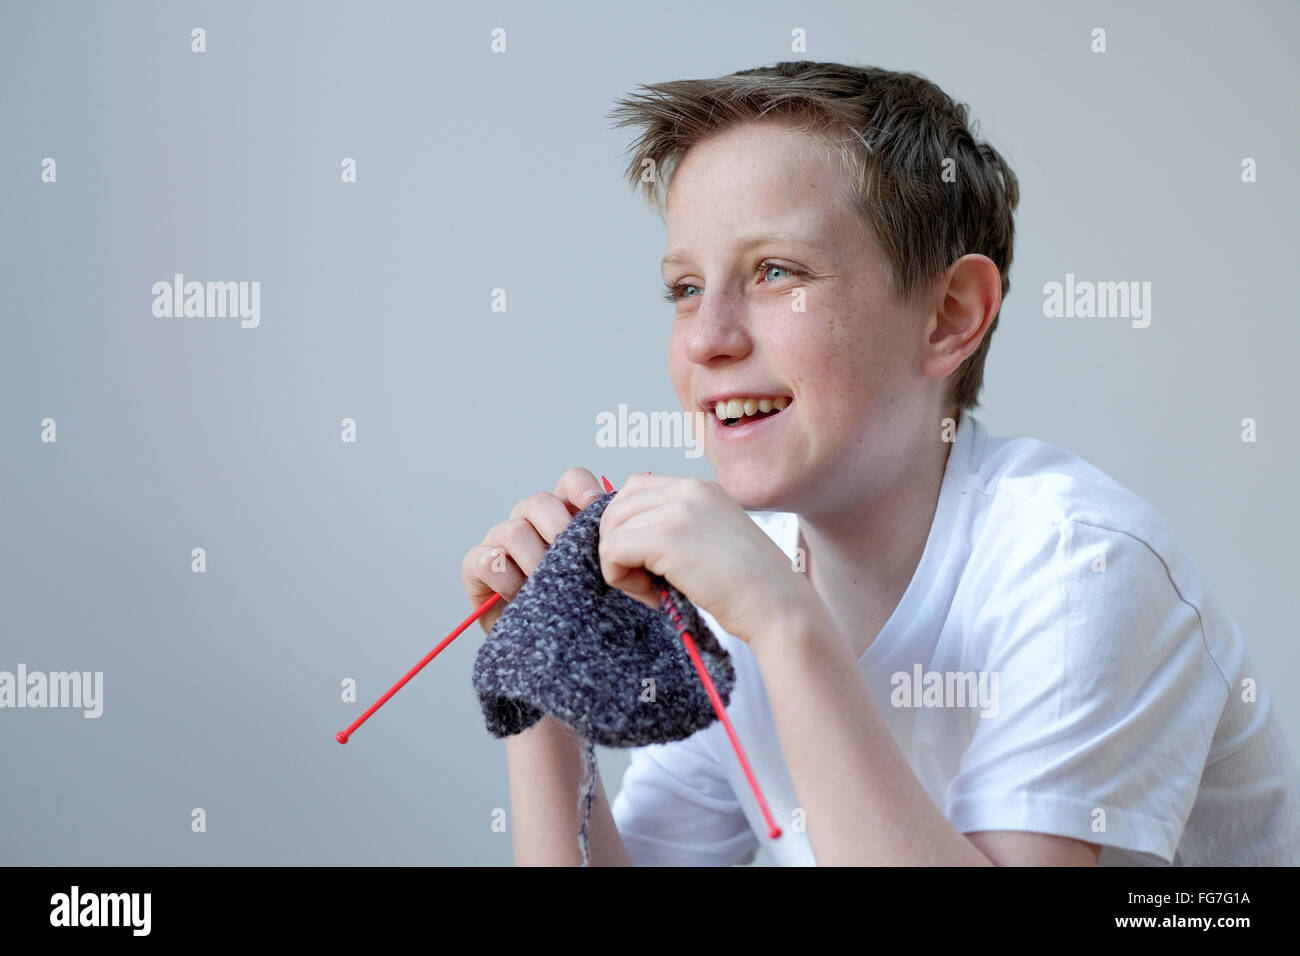 A happy boy knitting with wool Stock Photo